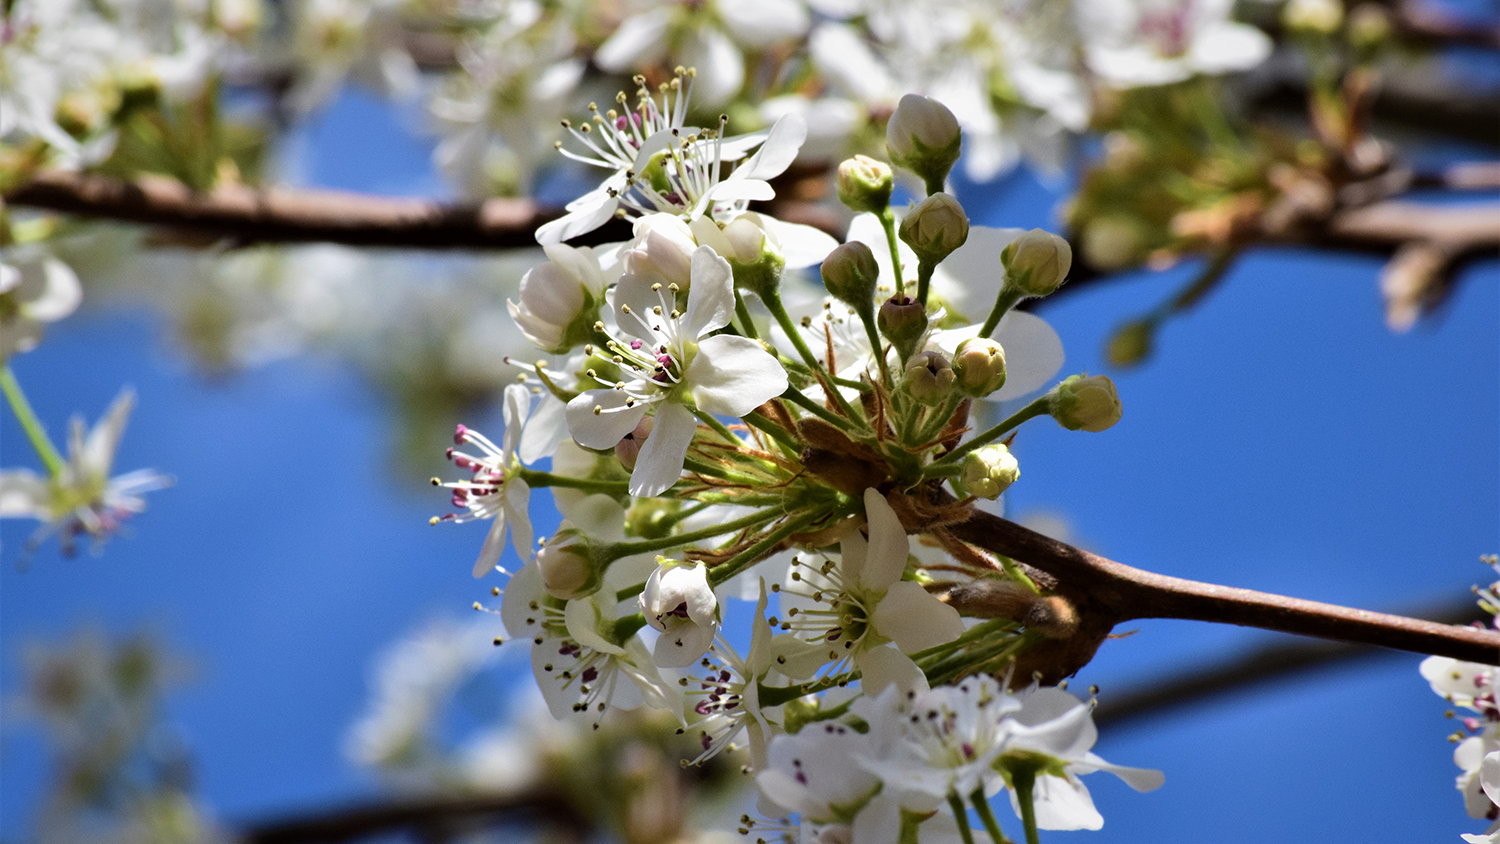 A white flower blooming on a Bradford pear tree - Bradford Pear Bounty Program Returns to North Carolina - College of Natural Resources News NC State University